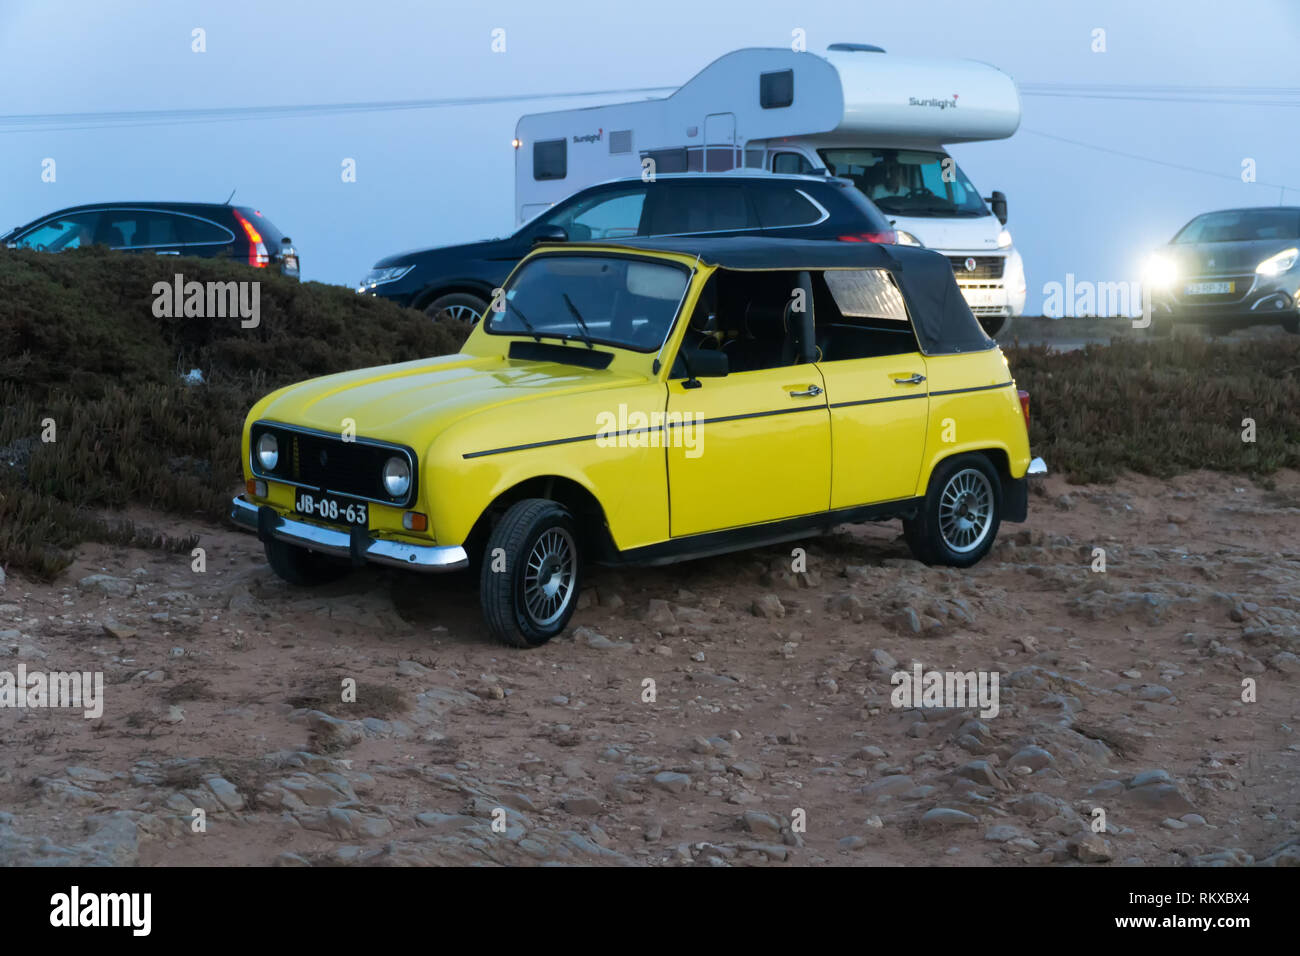 Yellow Renault 4 car oldtimer convertible parked at stony parking by the sea at sunset. CAPE ST. VINCENT, PORTUGAL - SEPTEMBER 5, 2018. Stock Photo